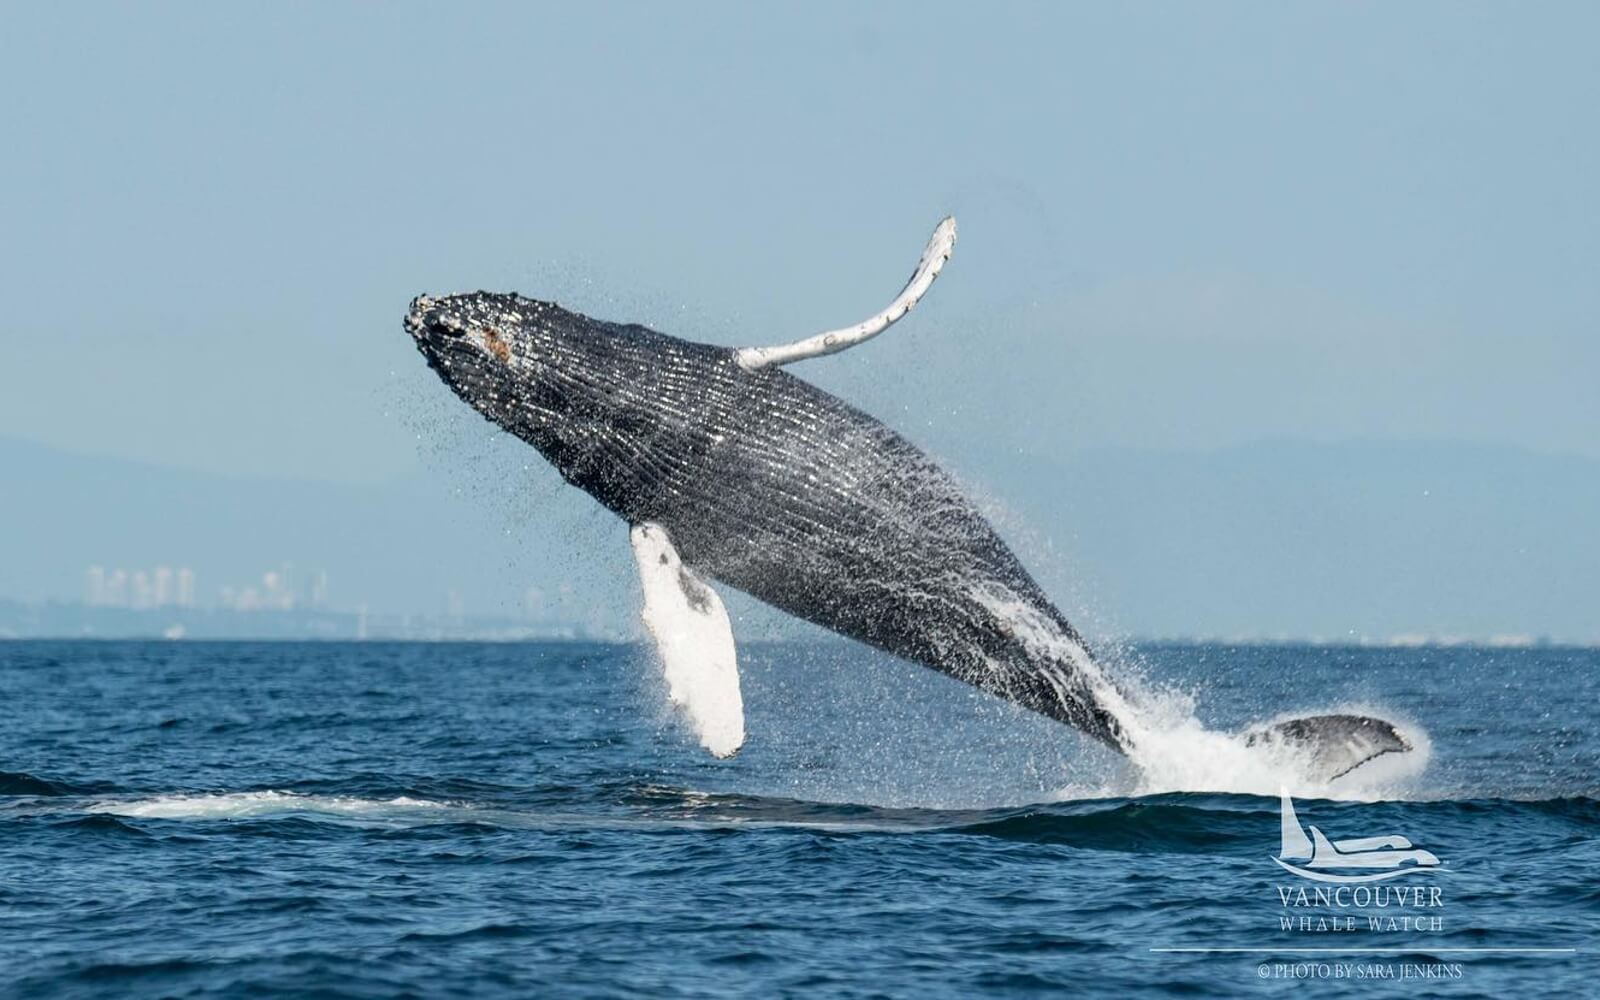 a humpback whale spotted during vancouver whale watching tour